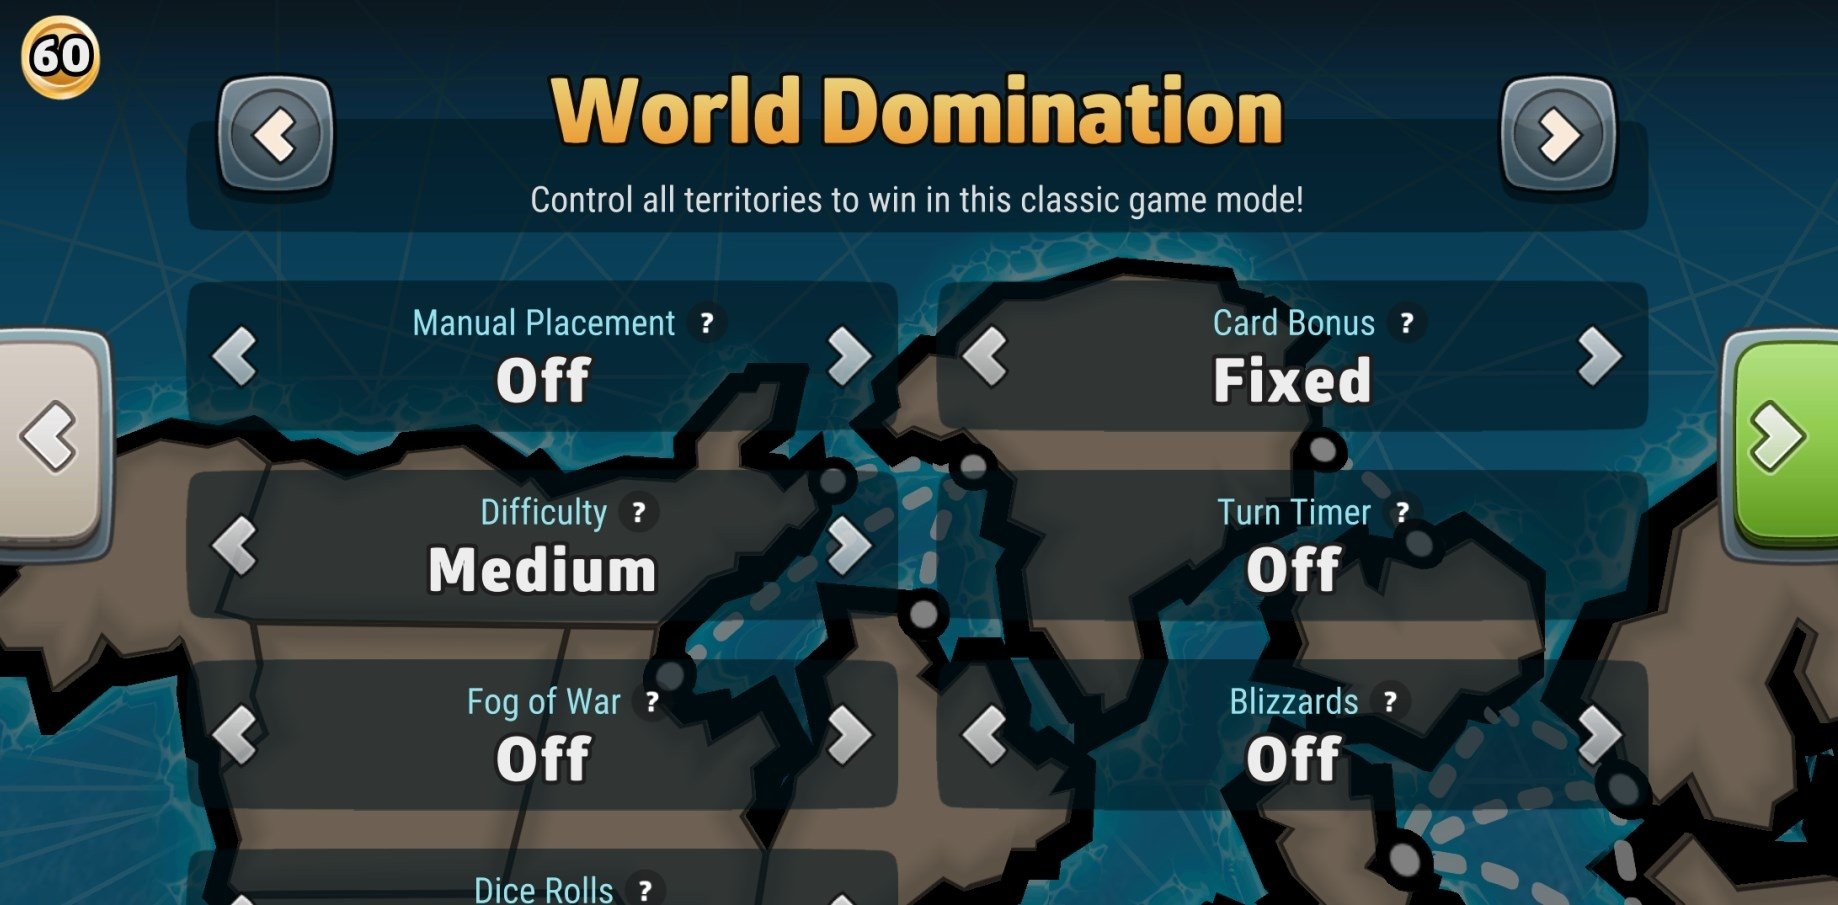 RISK: Global Domination – Applications sur Google Play